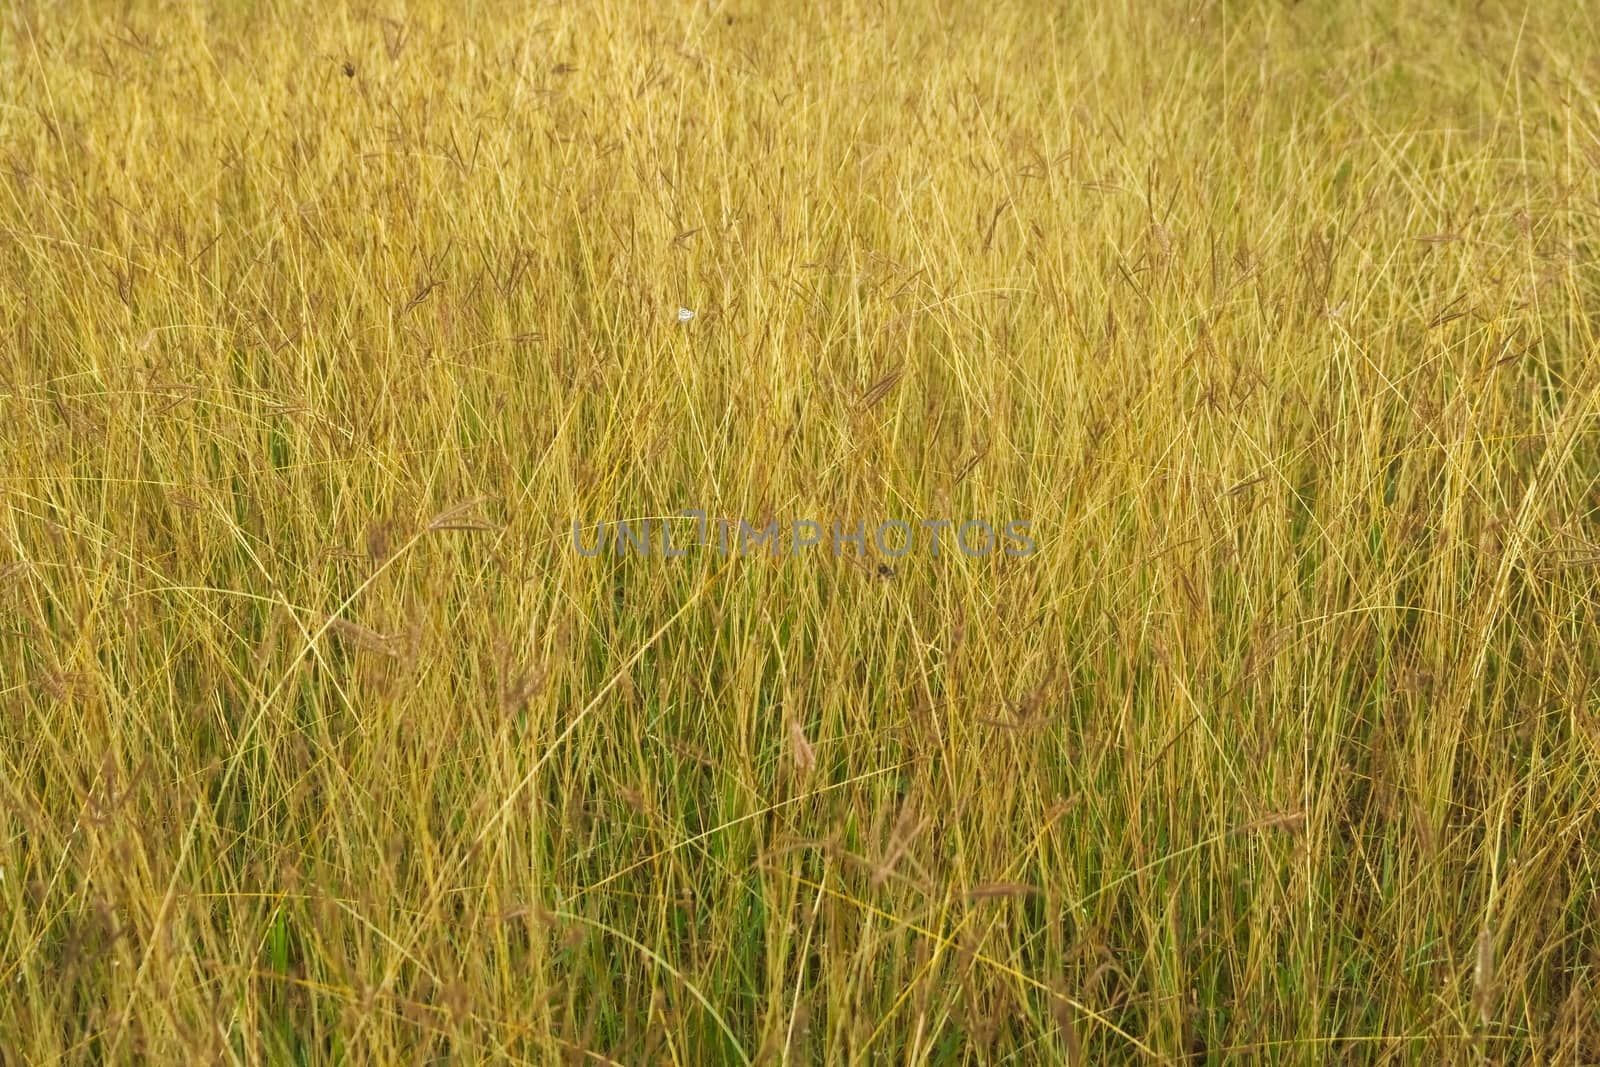 Tall yellow grass on an uncultivated field. Full frame texture background.